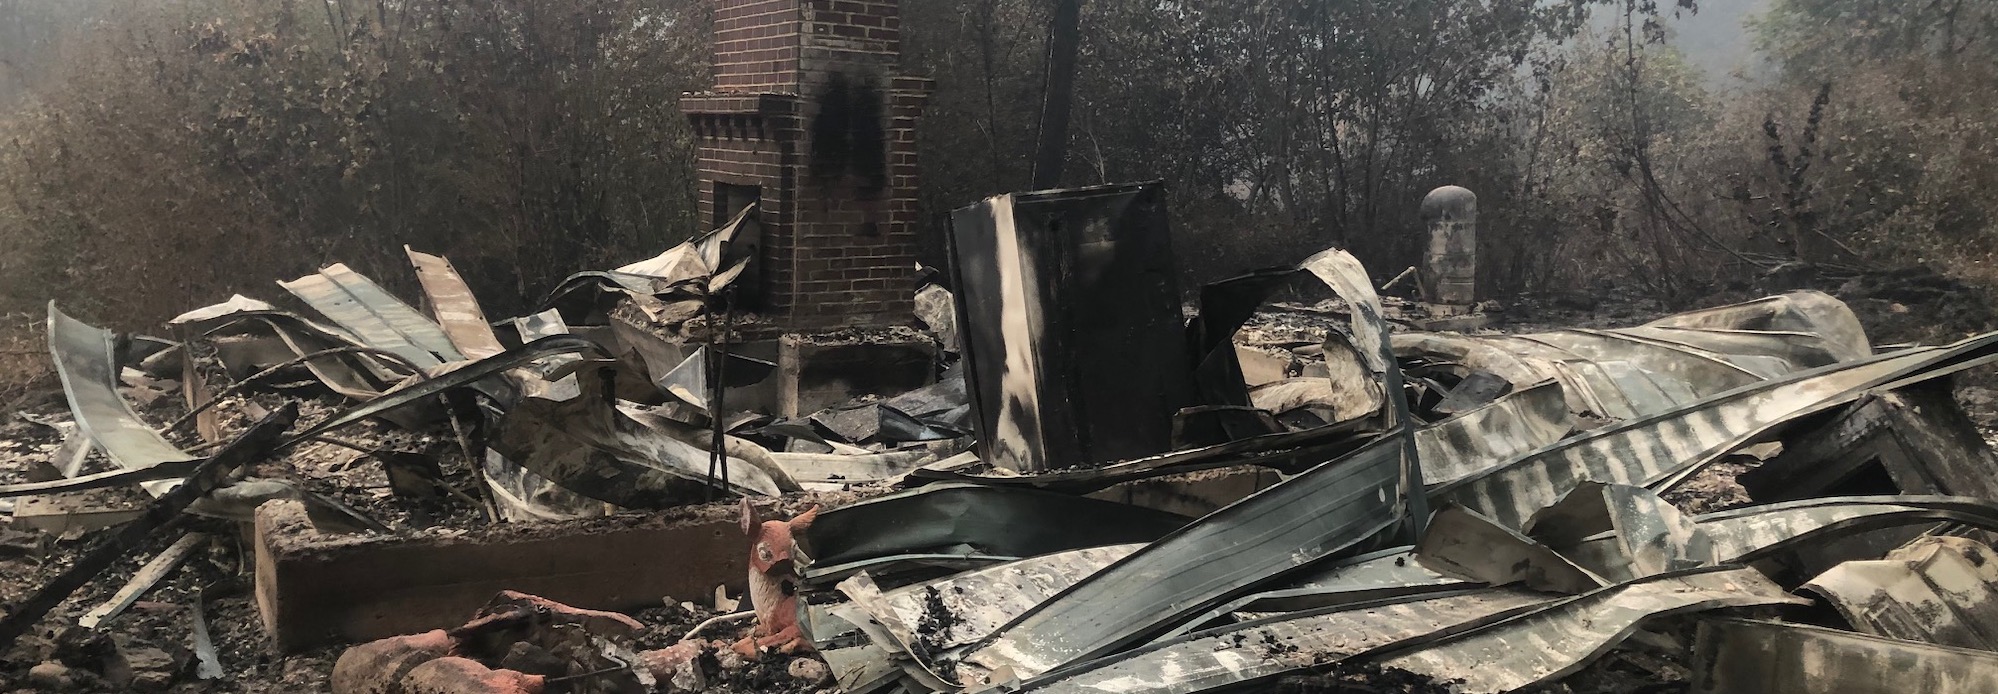 Photo of burned house submitted by Murphy